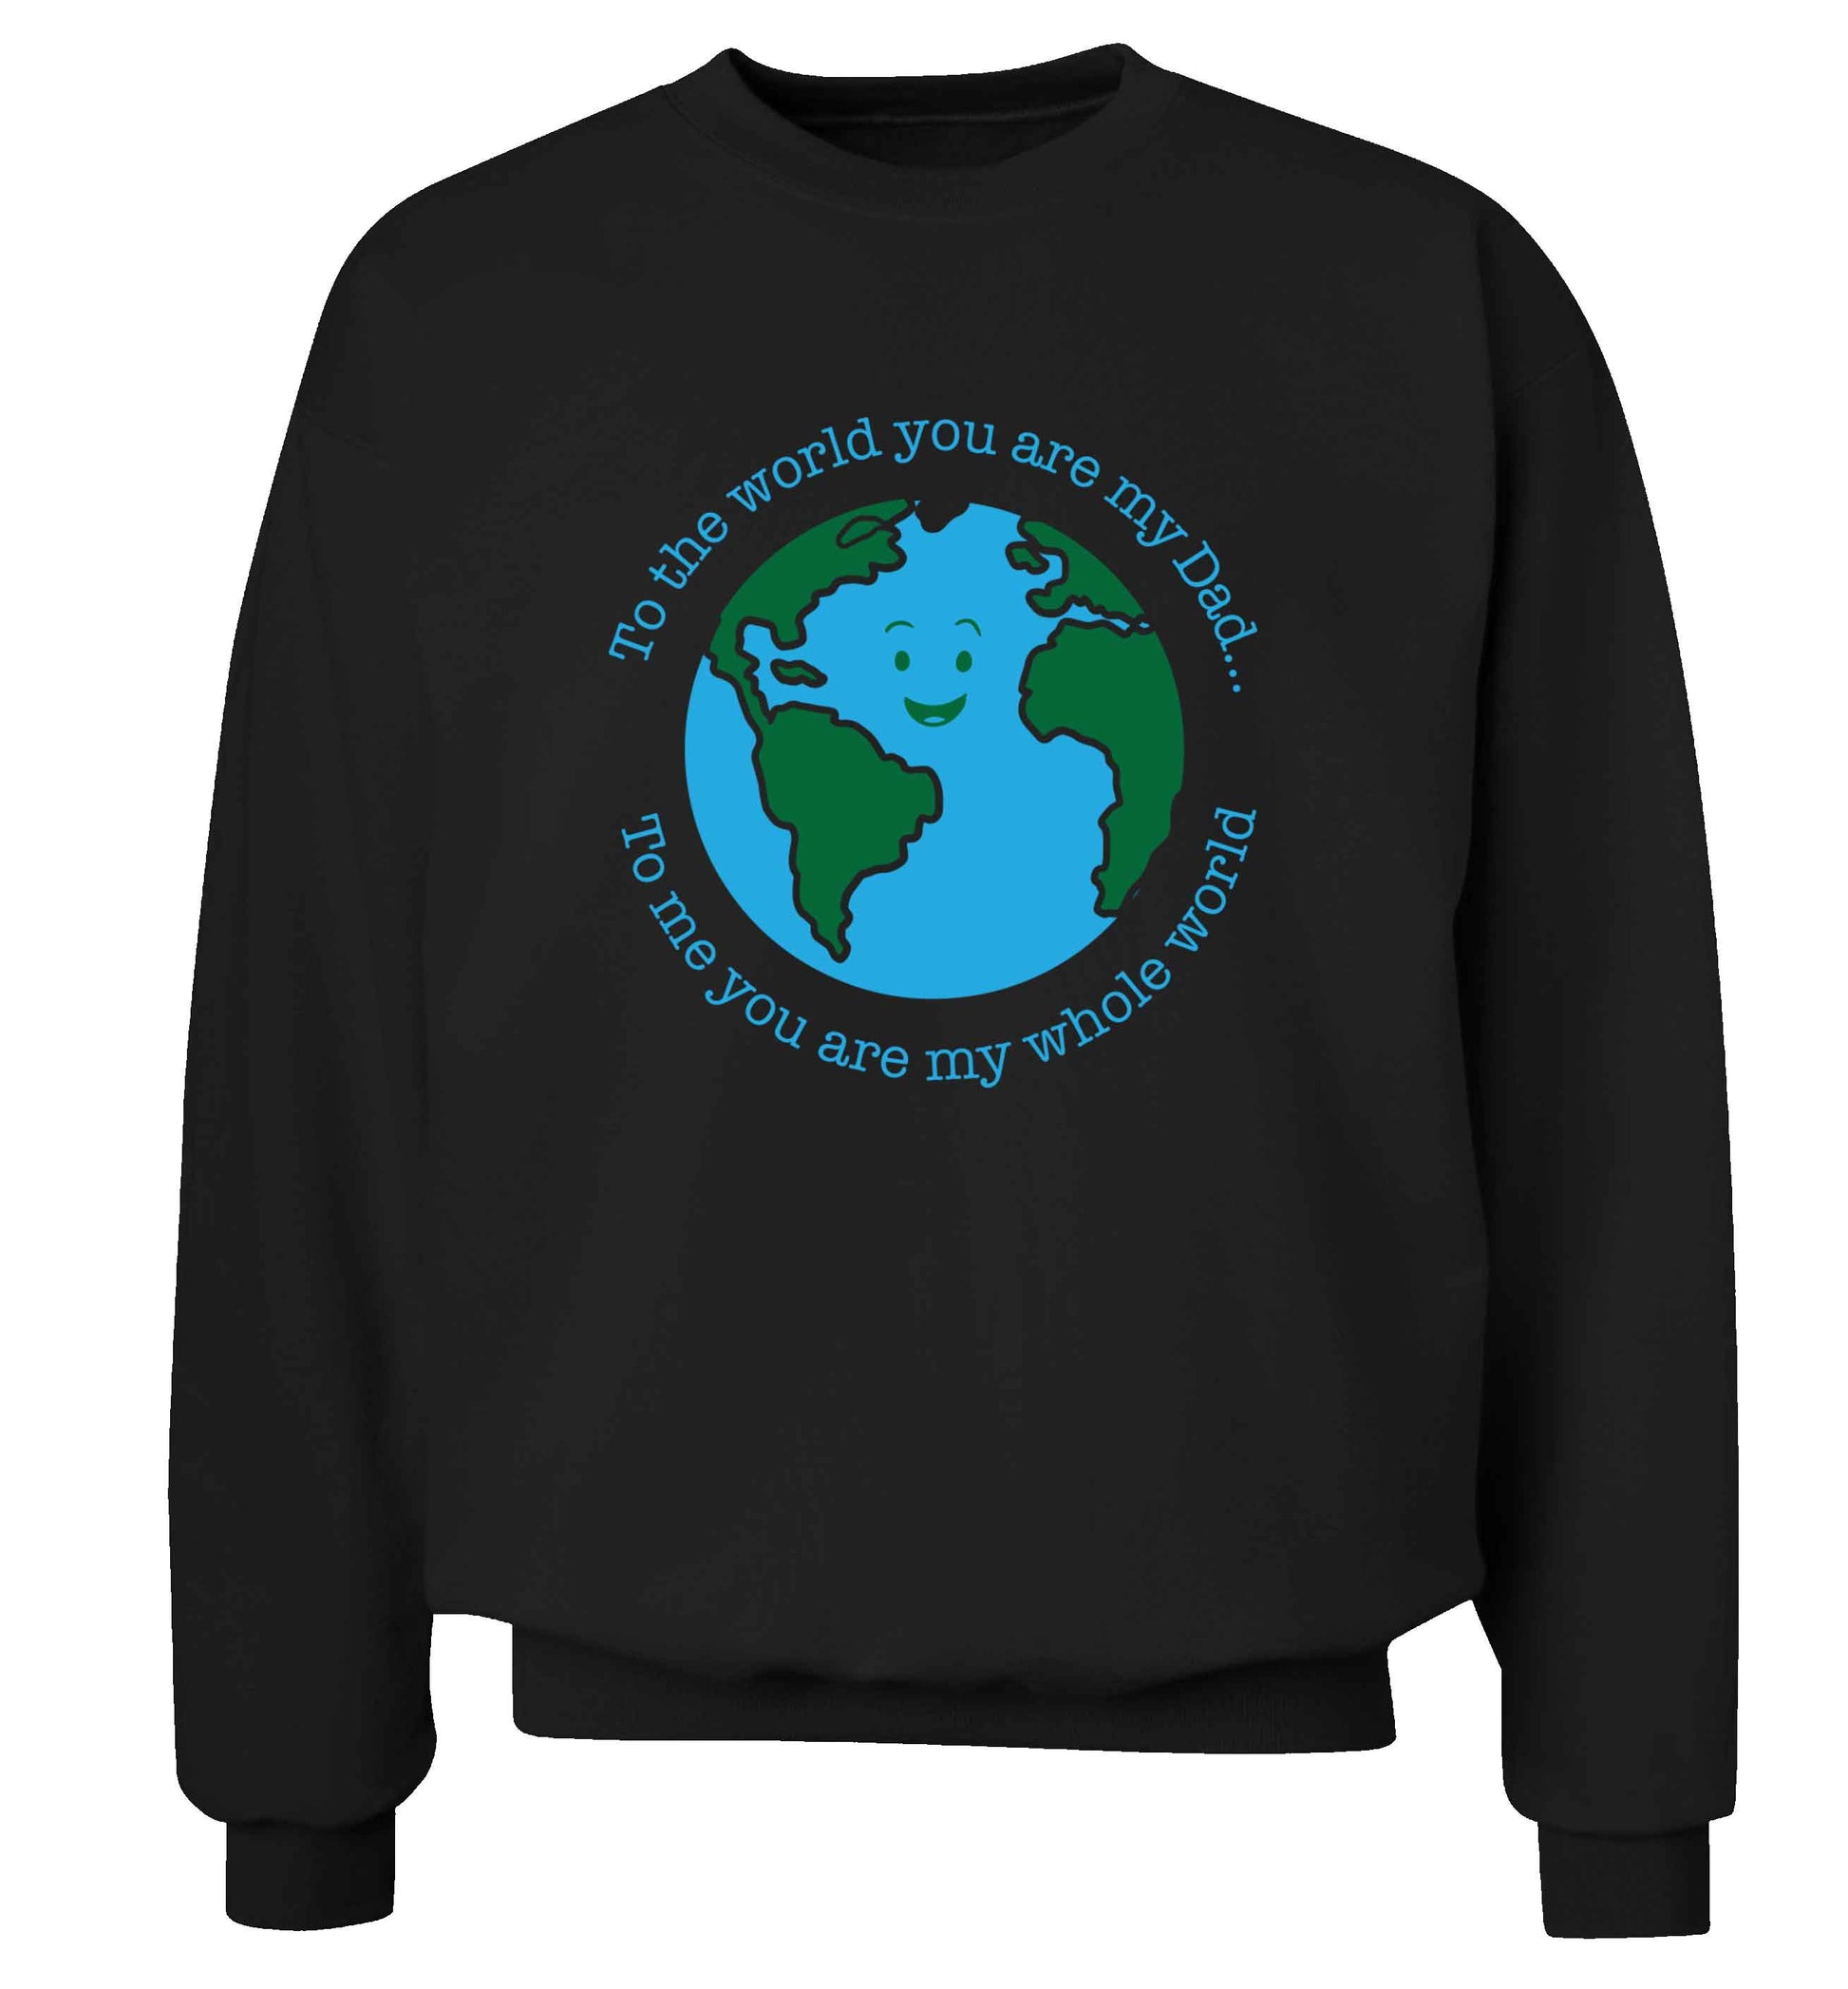 To the world you are my dad, to me you are my whole world adult's unisex black sweater 2XL